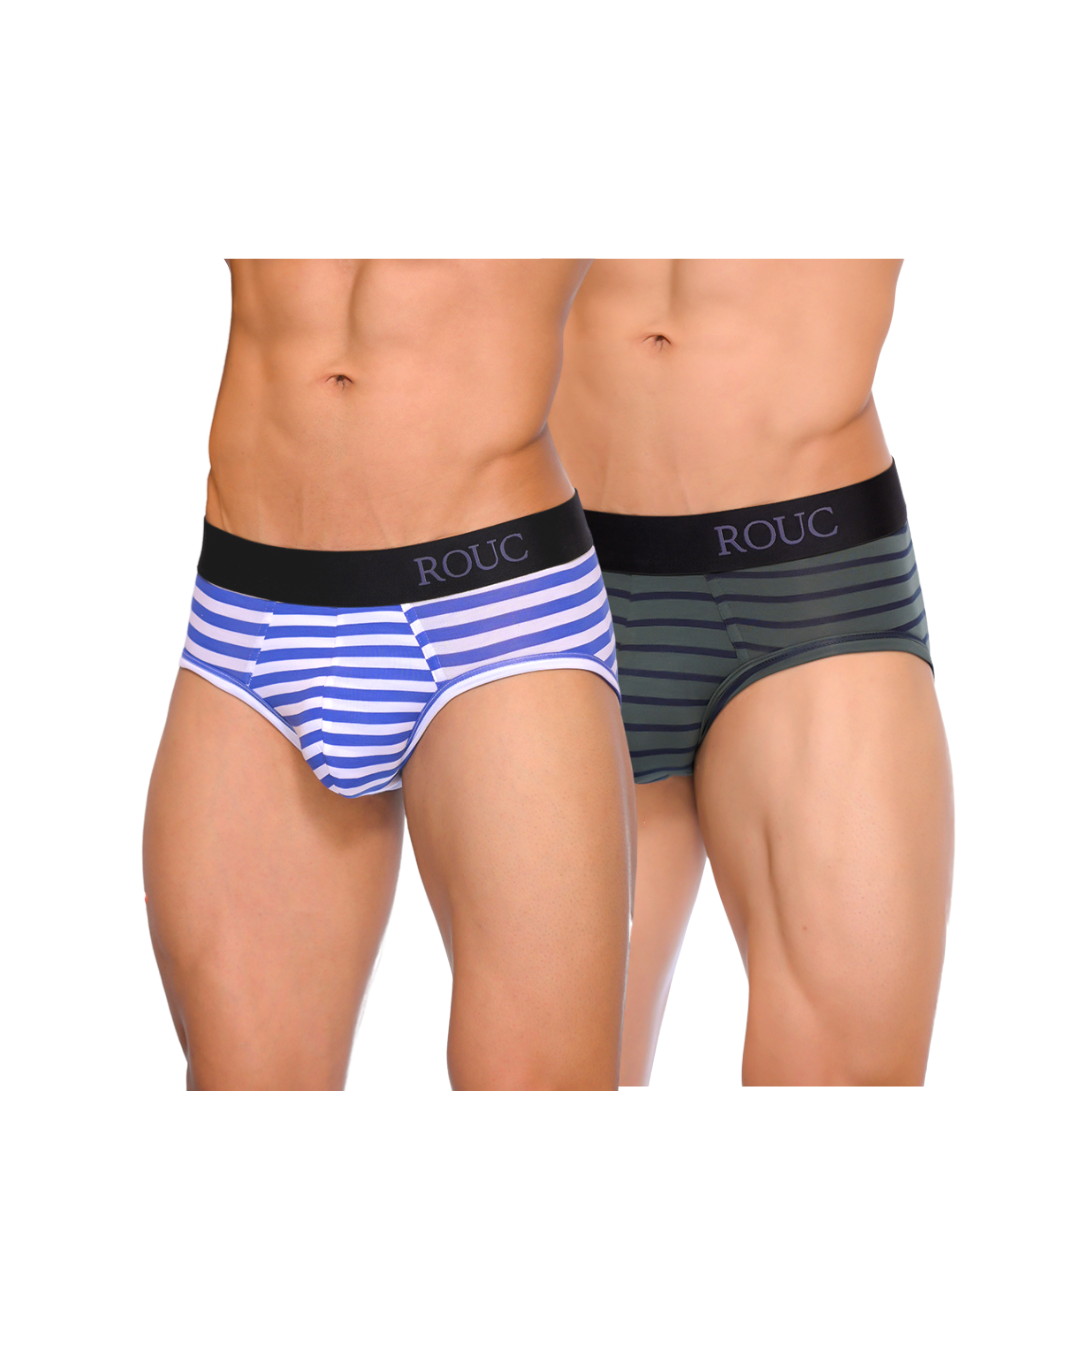 Roscos Comforts Jock Washable Incontinence Underwear for Men- 2 Pack – Item  #5075 – H&J Liquidators and Closeouts, Inc